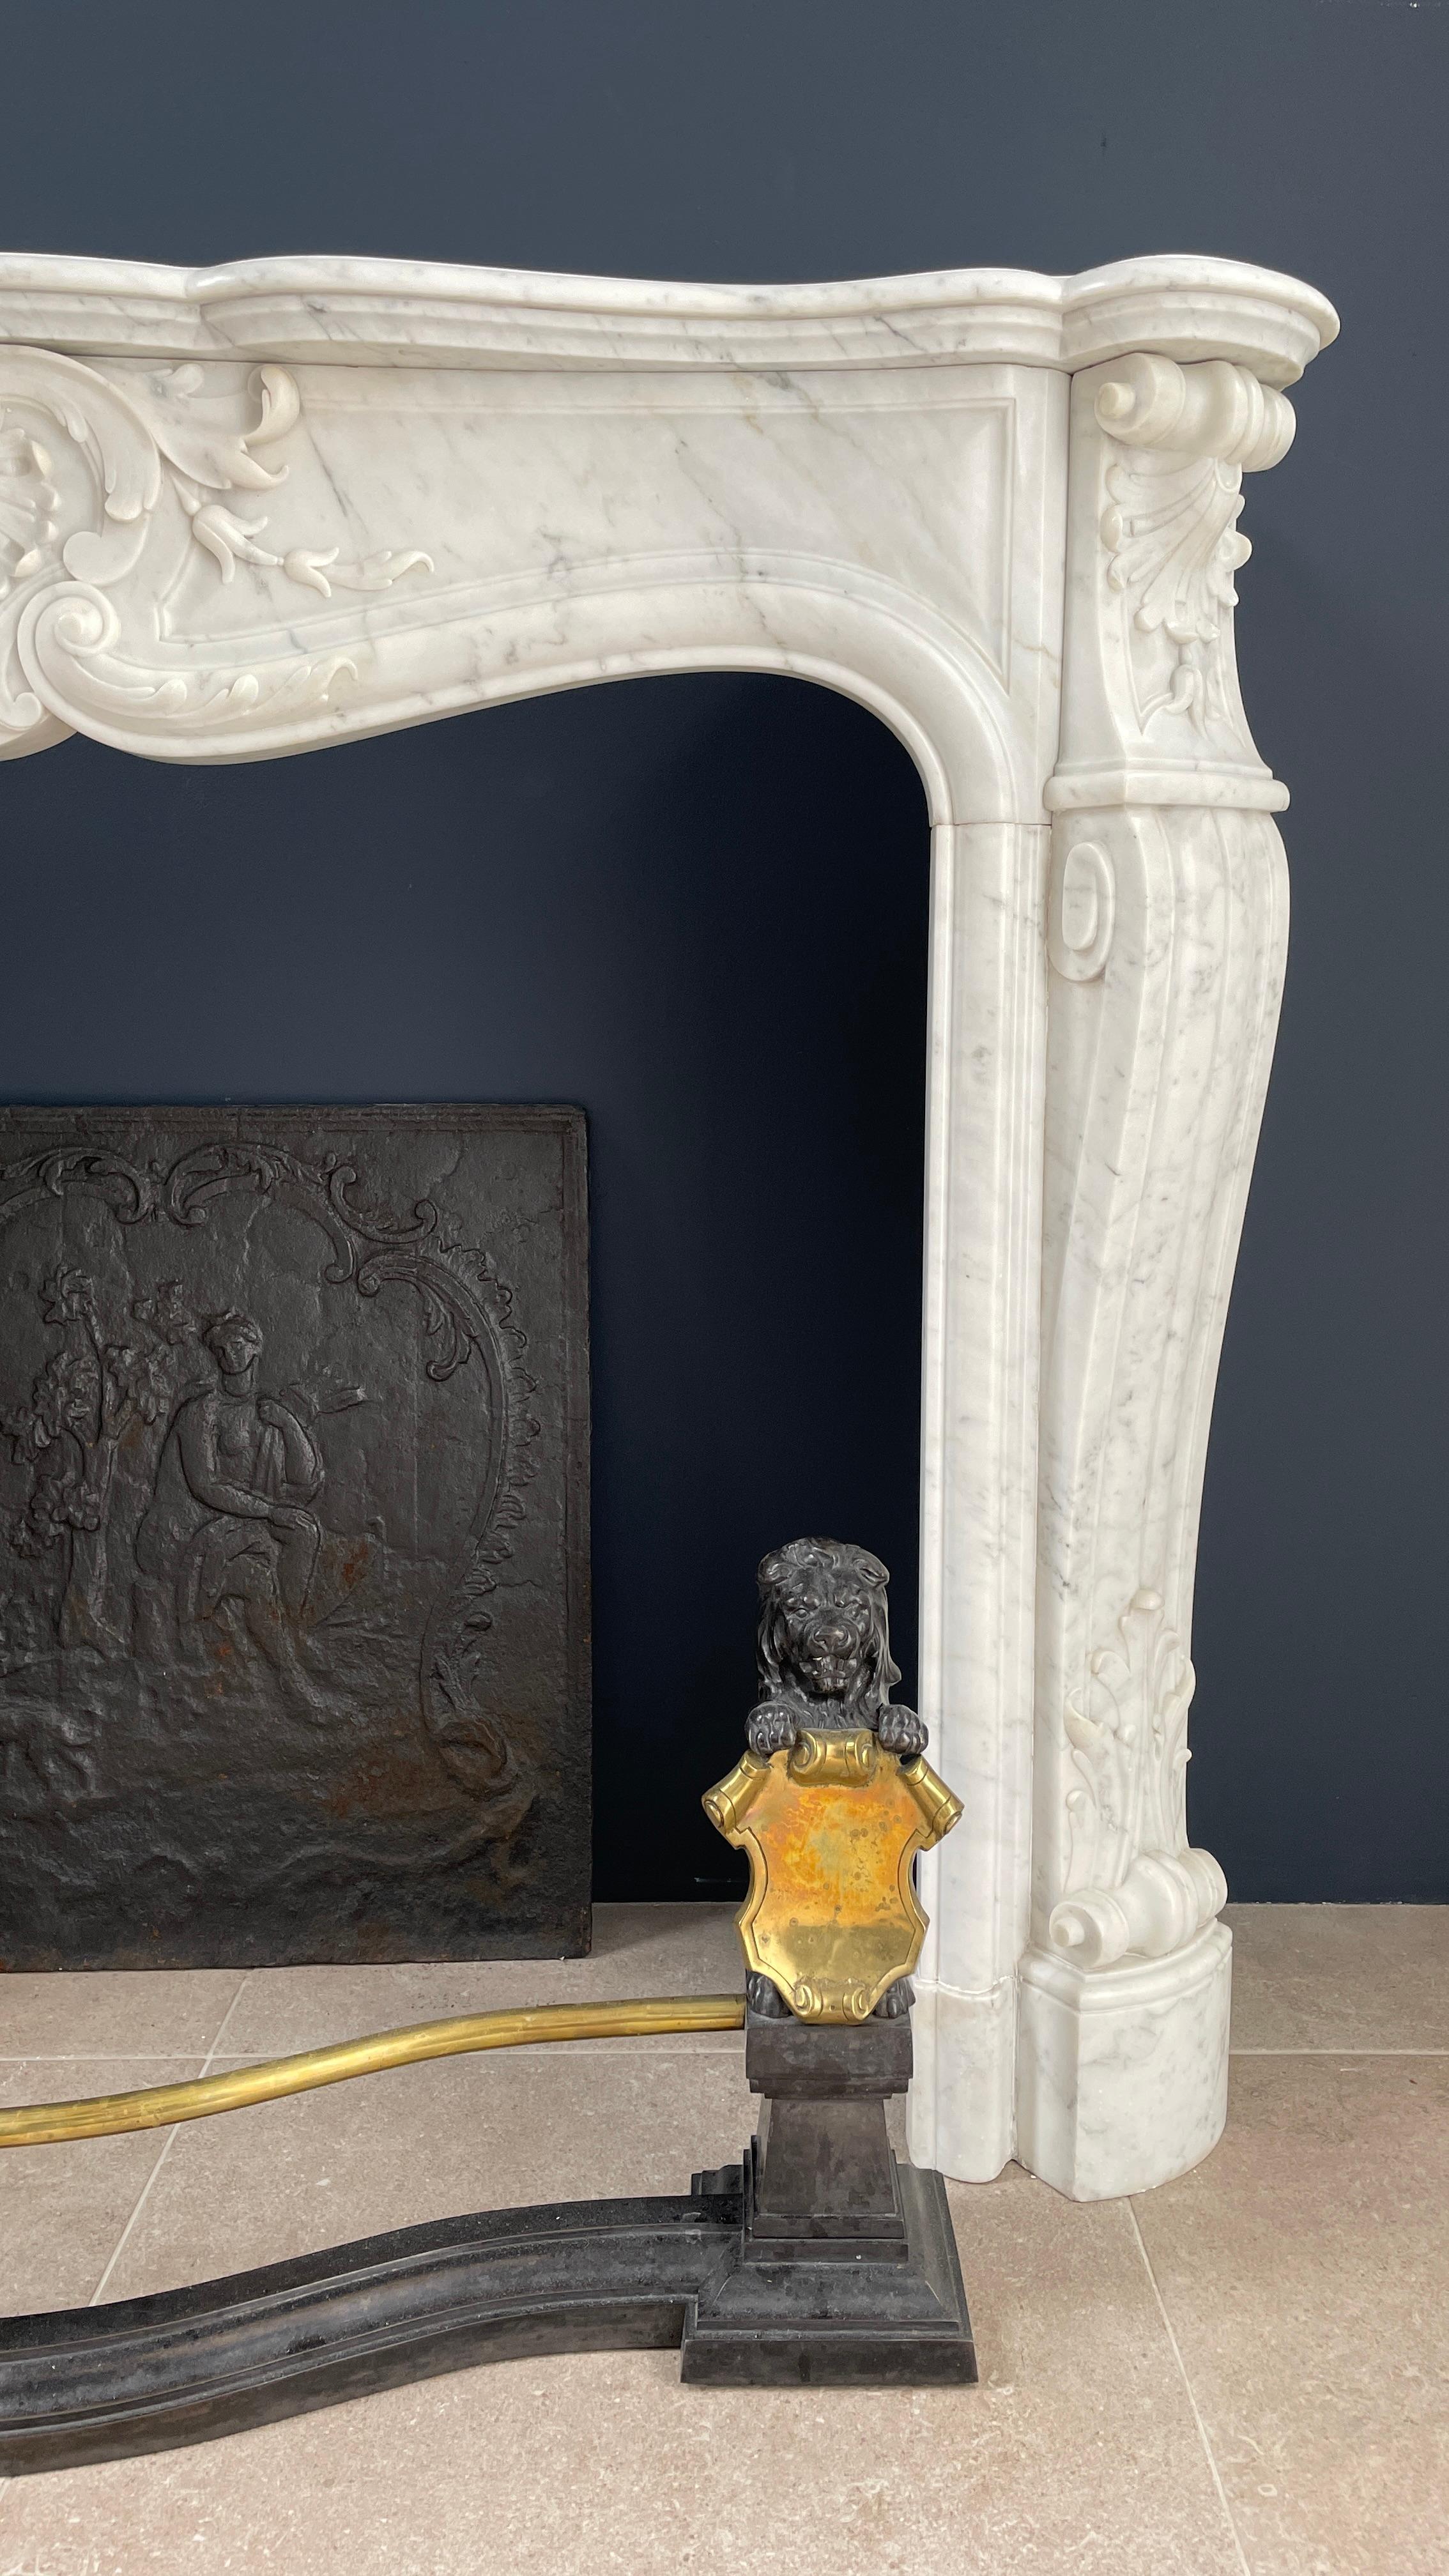 Introducing our exquisite Luxury Antique French Half Circular Fireplace crafted from Carrara marble. Elevate your living space with this stunning piece, boasting a thick frontal facade adorned with an intricately carved shell. The opulence of this